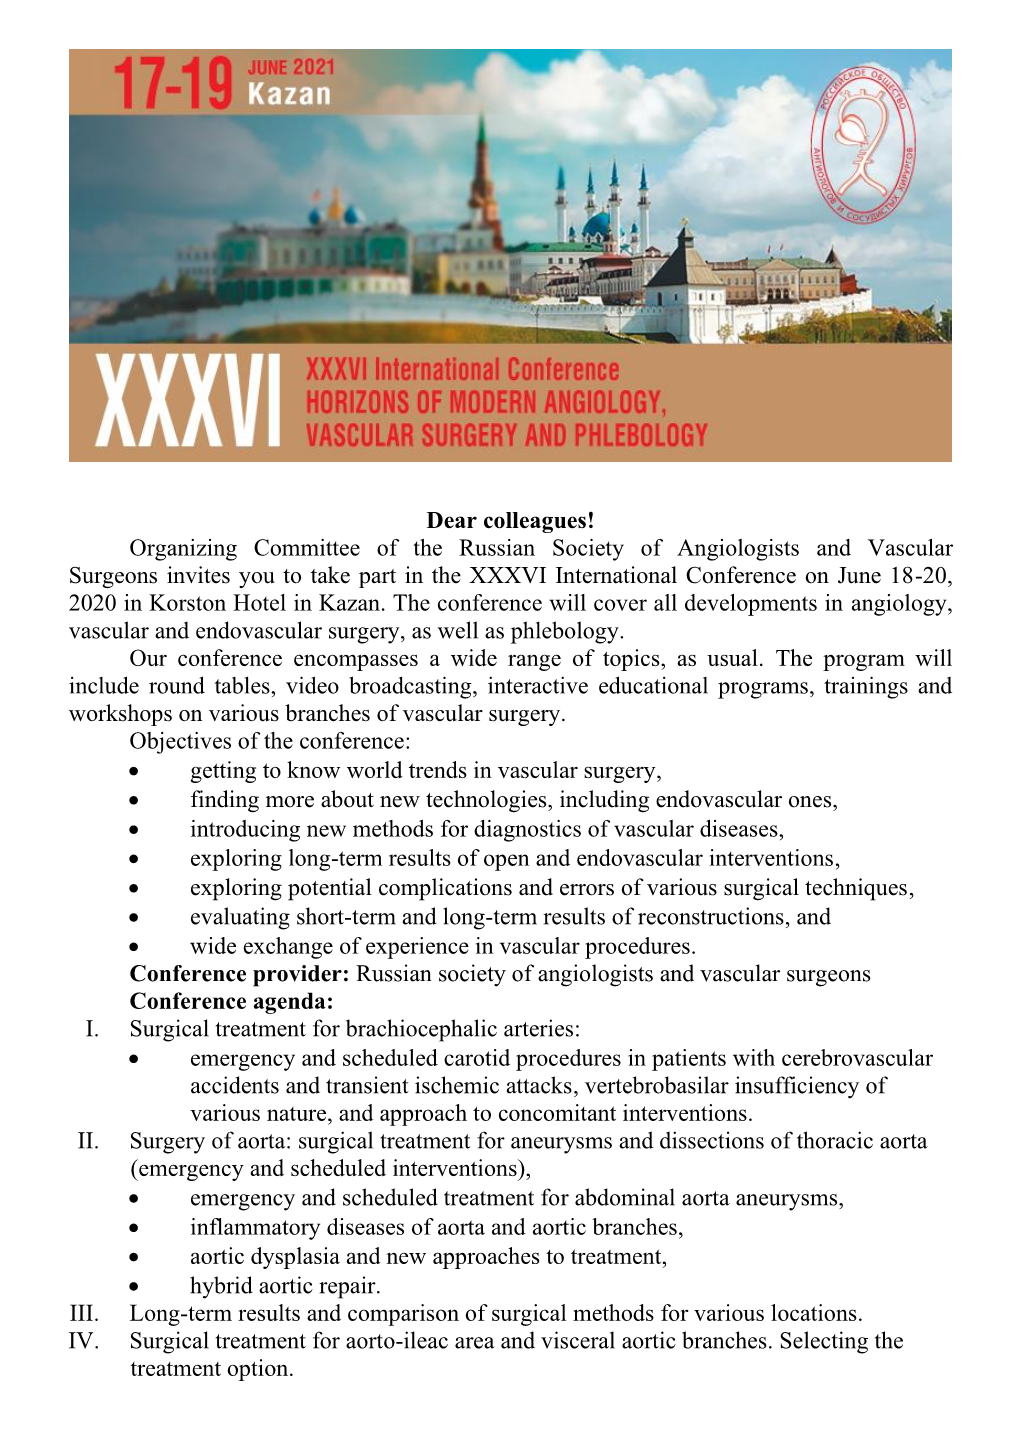 Russian Society of Angiologists and Vascular Surgeons Invites You to Take Part in the XXXVI International Conference on June 18-20, 2020 in Korston Hotel in Kazan